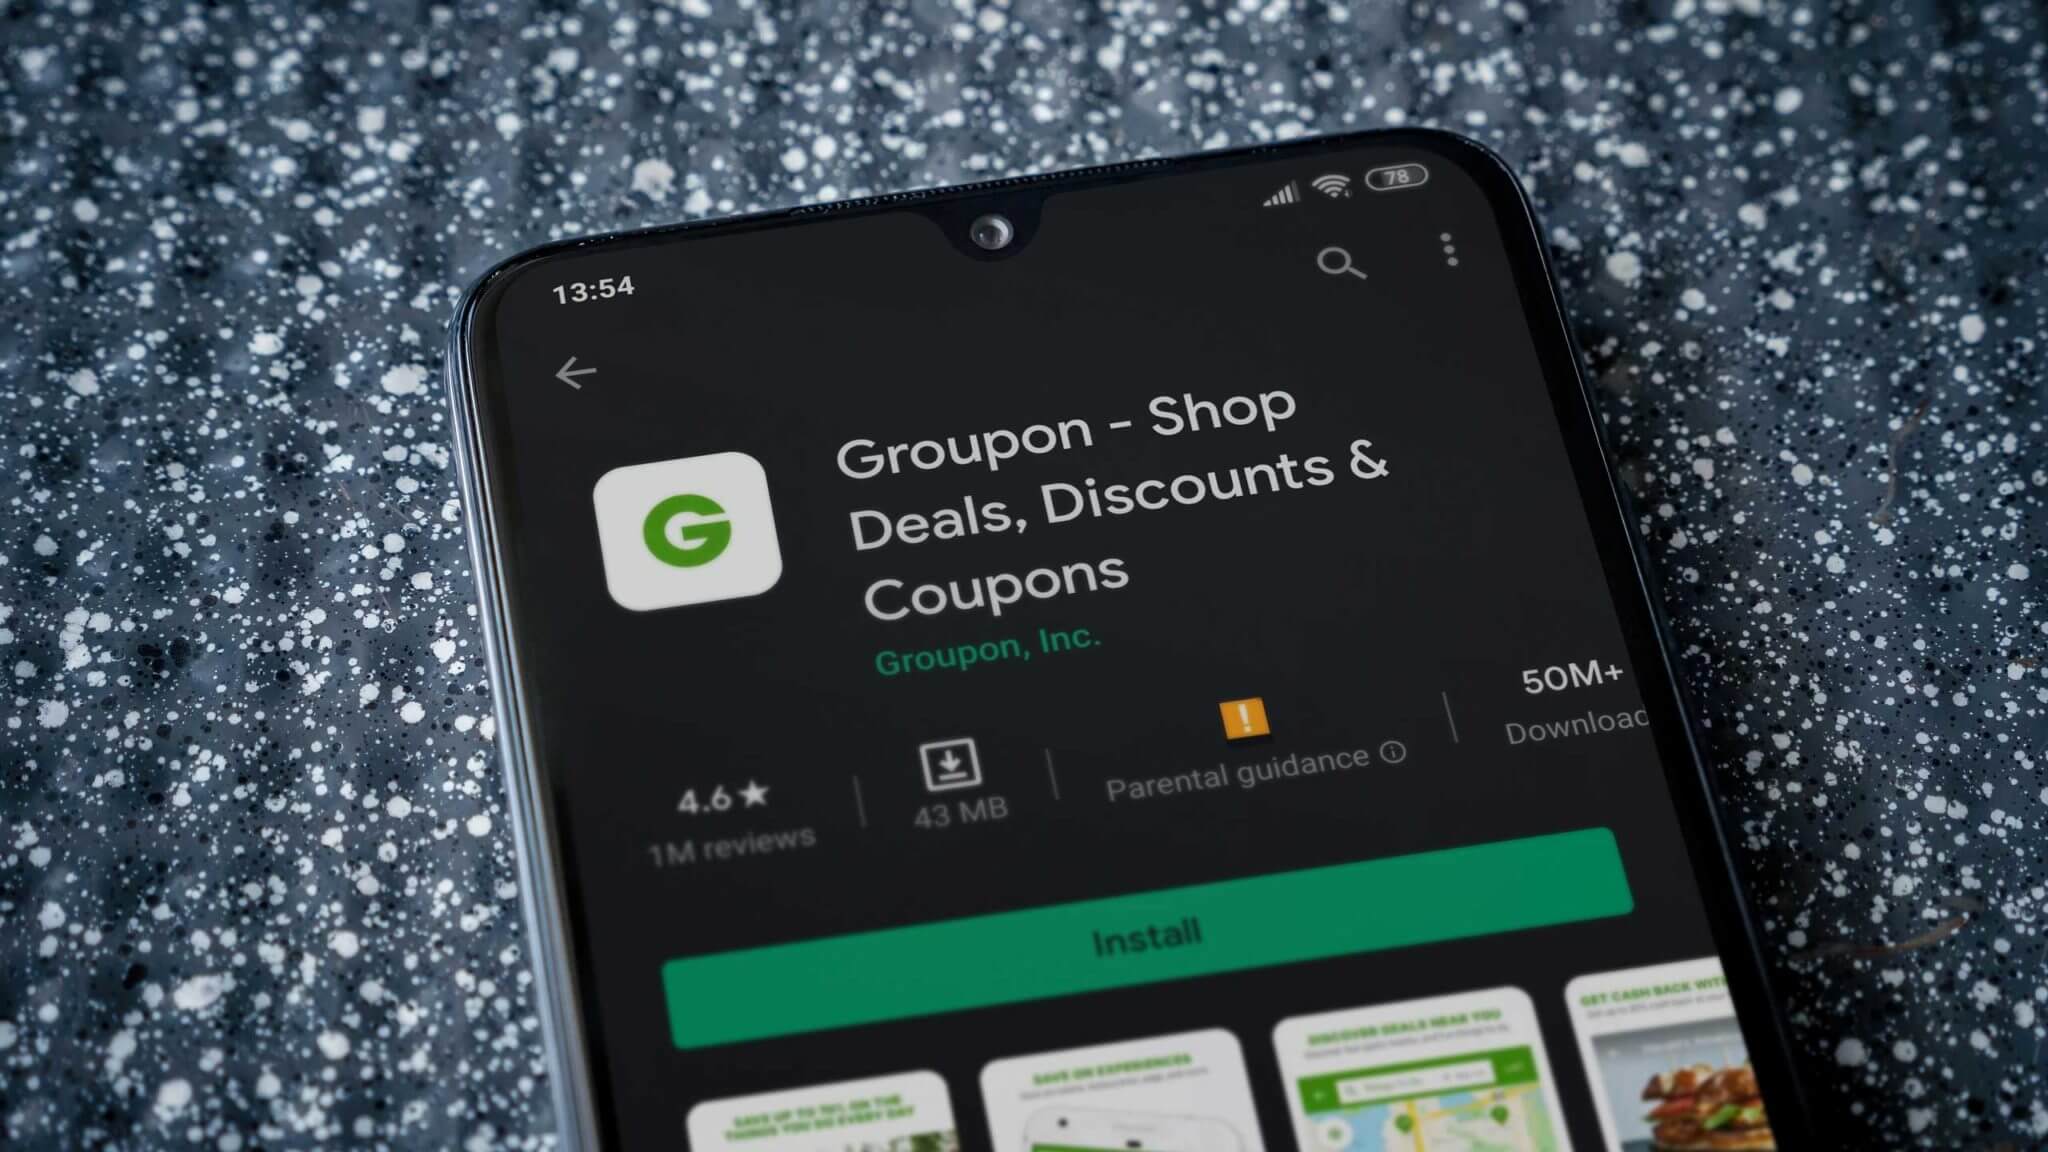 Groupon app on mobile phone